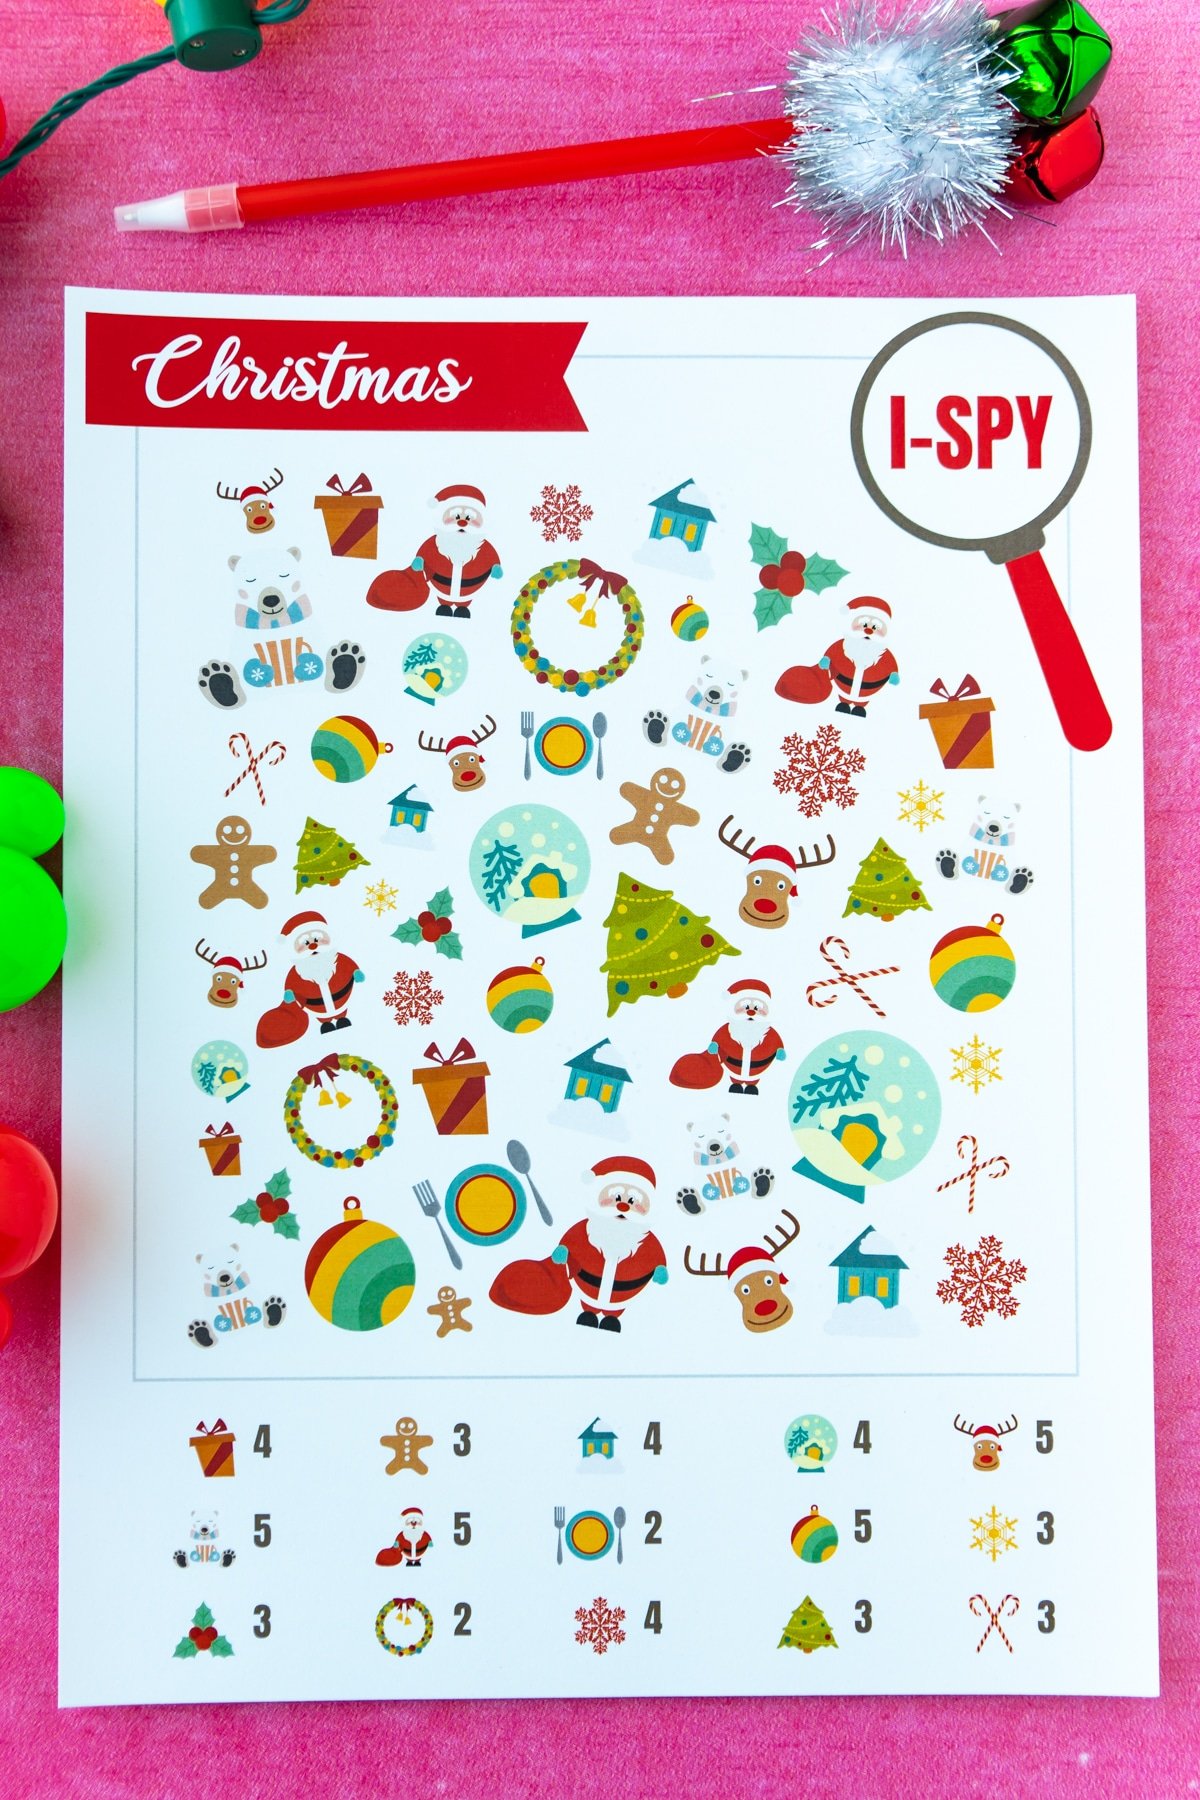 Printed out Christmas i-spy game on a pink background